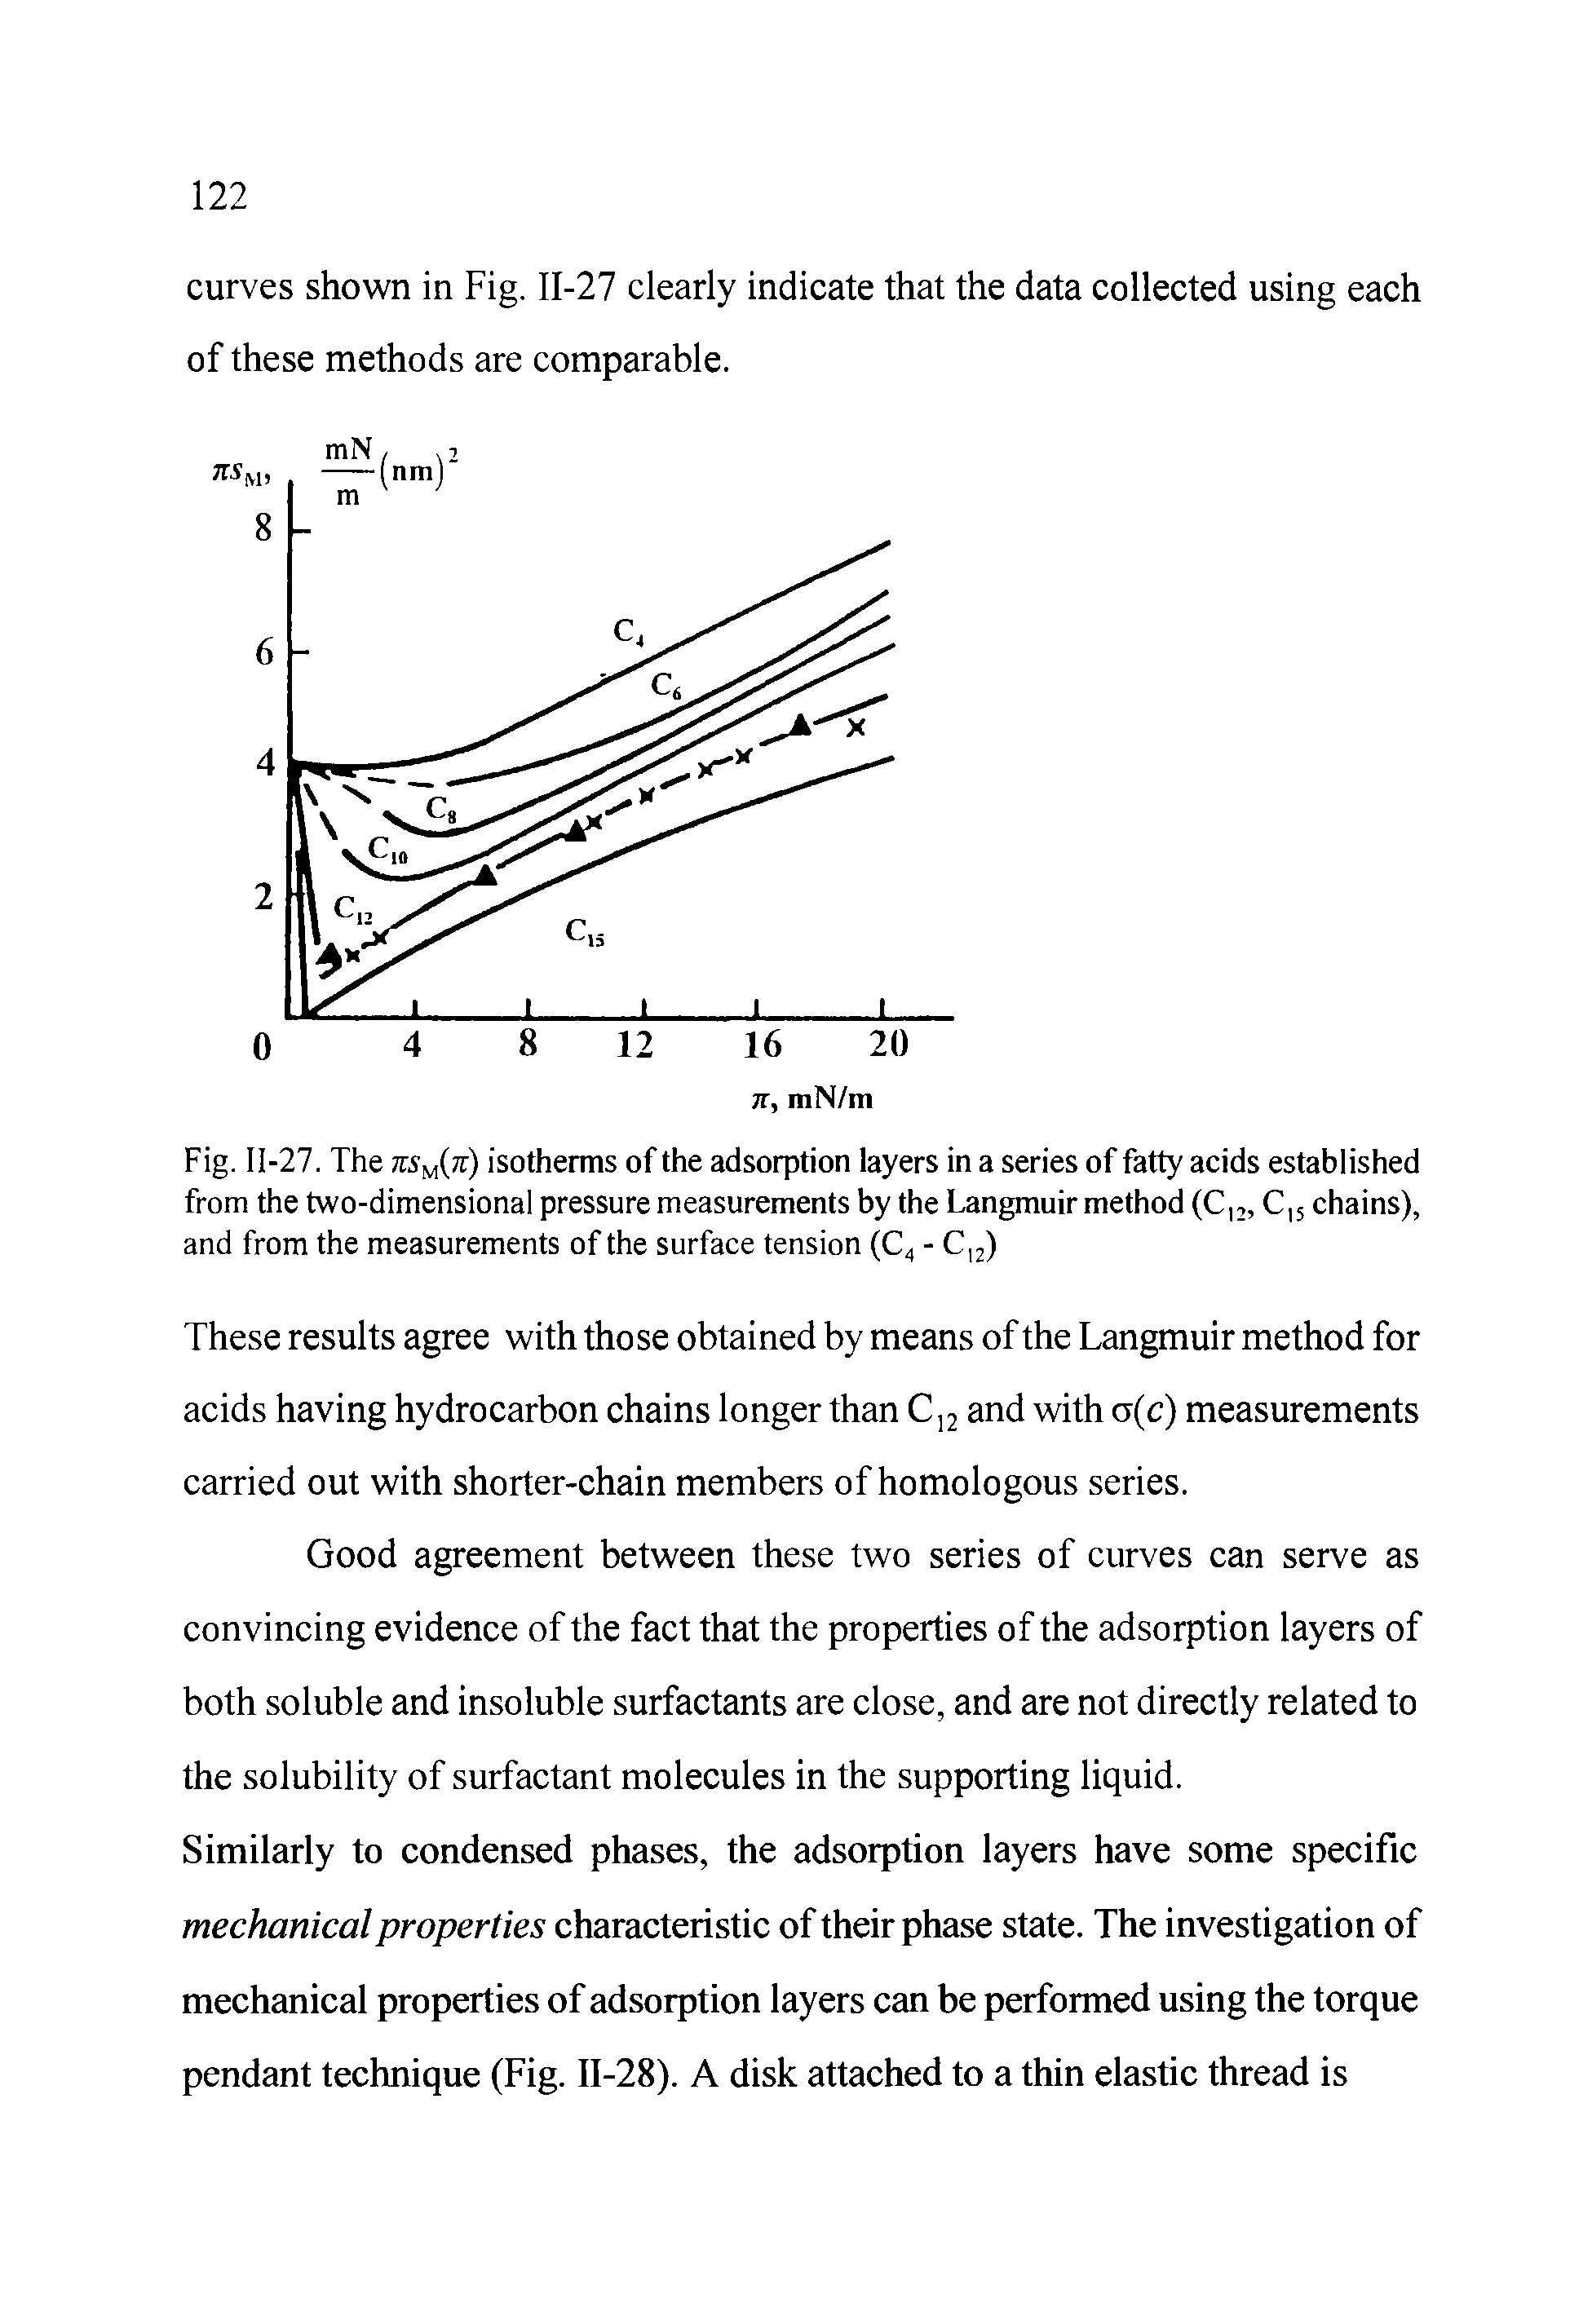 Fig. 11-27. The isotherms of the adsorption layers in a series of fatty acids established from the two-dimensional pressure measurements by the Langmuir method (C, C, 5 chains), and from the measurements of the surface tension (C4 - Cl2)...